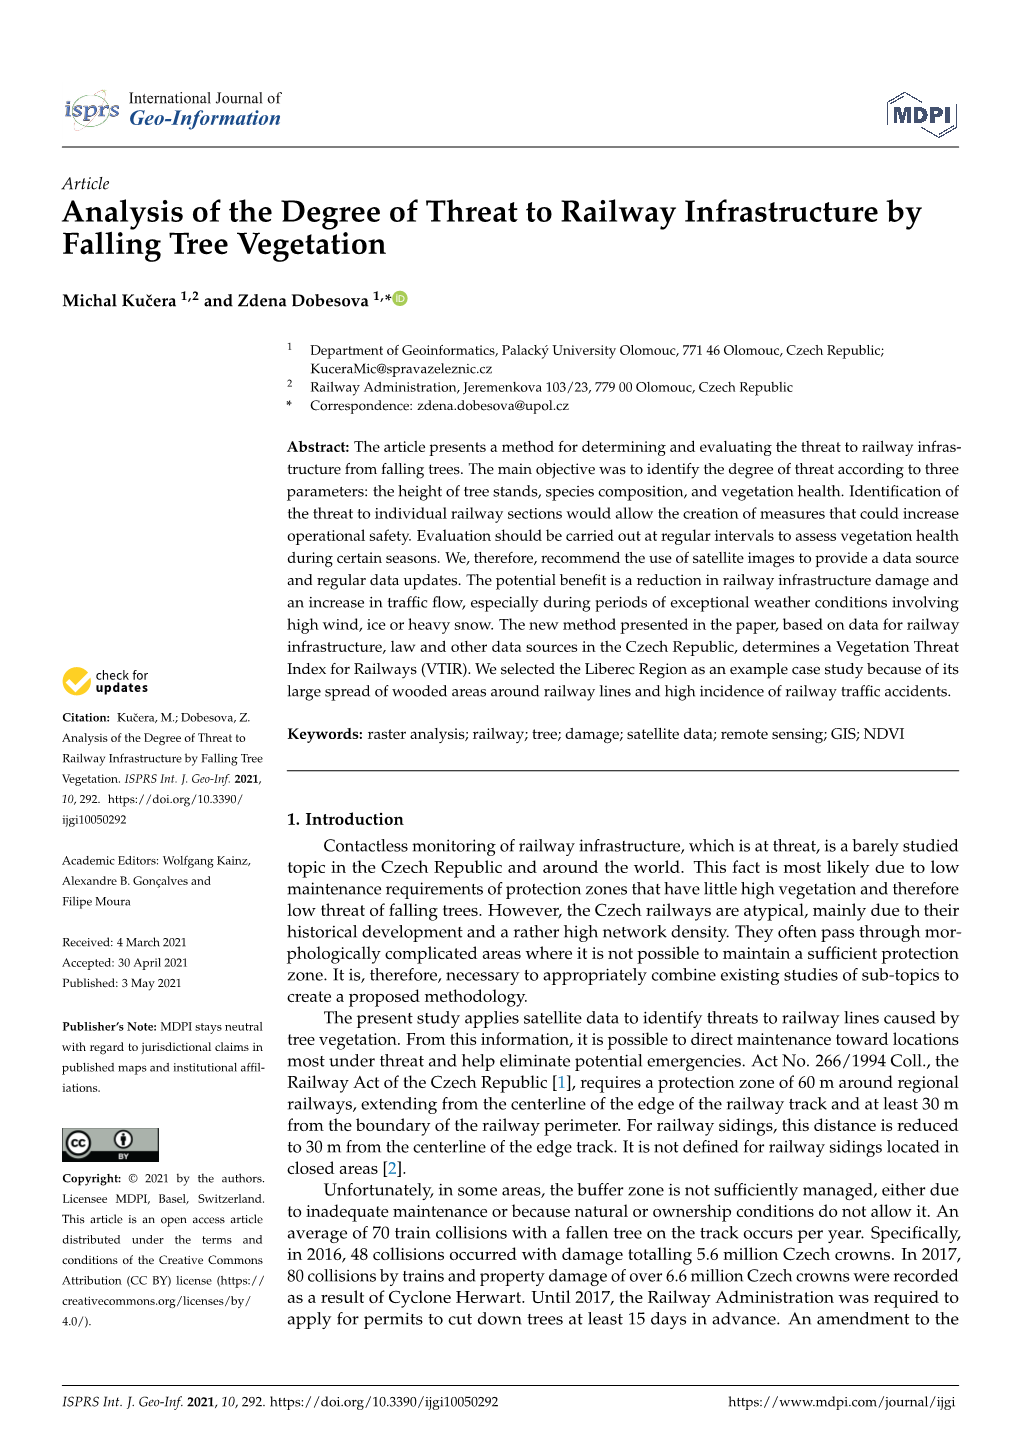 Analysis of the Degree of Threat to Railway Infrastructure by Falling Tree Vegetation